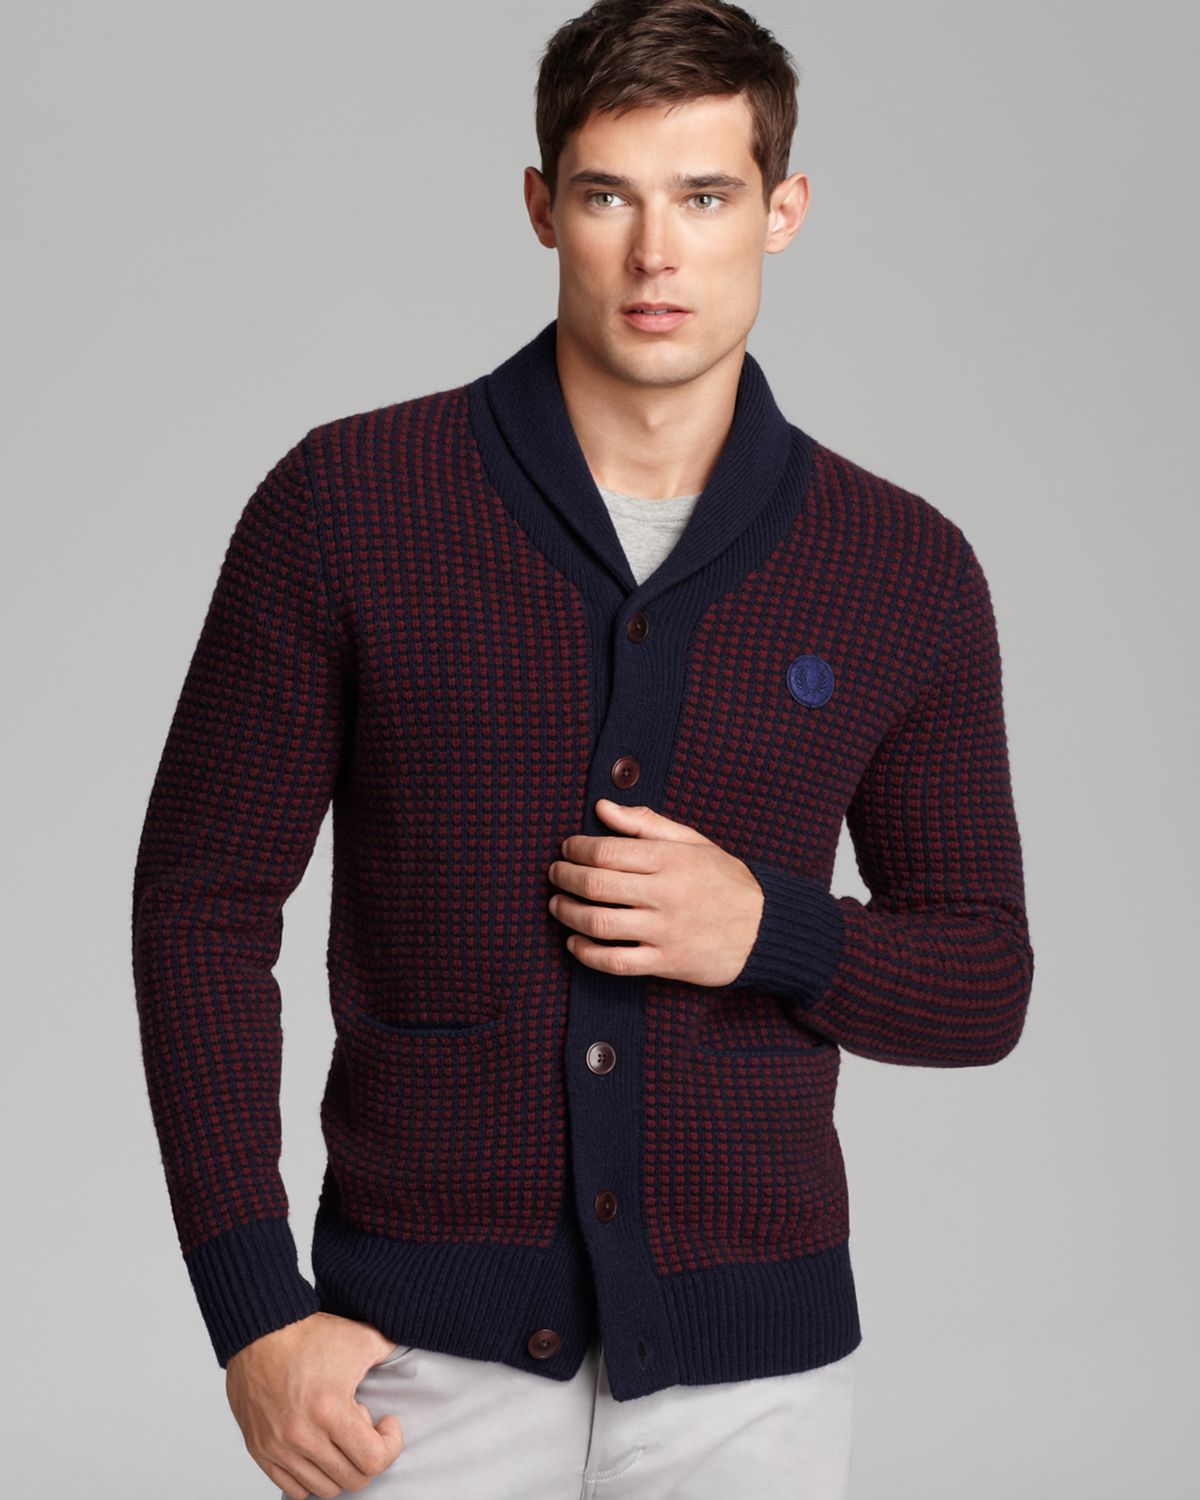 Lyst - Fred Perry Twotone Waffle Knit Cardigan in Red for Men